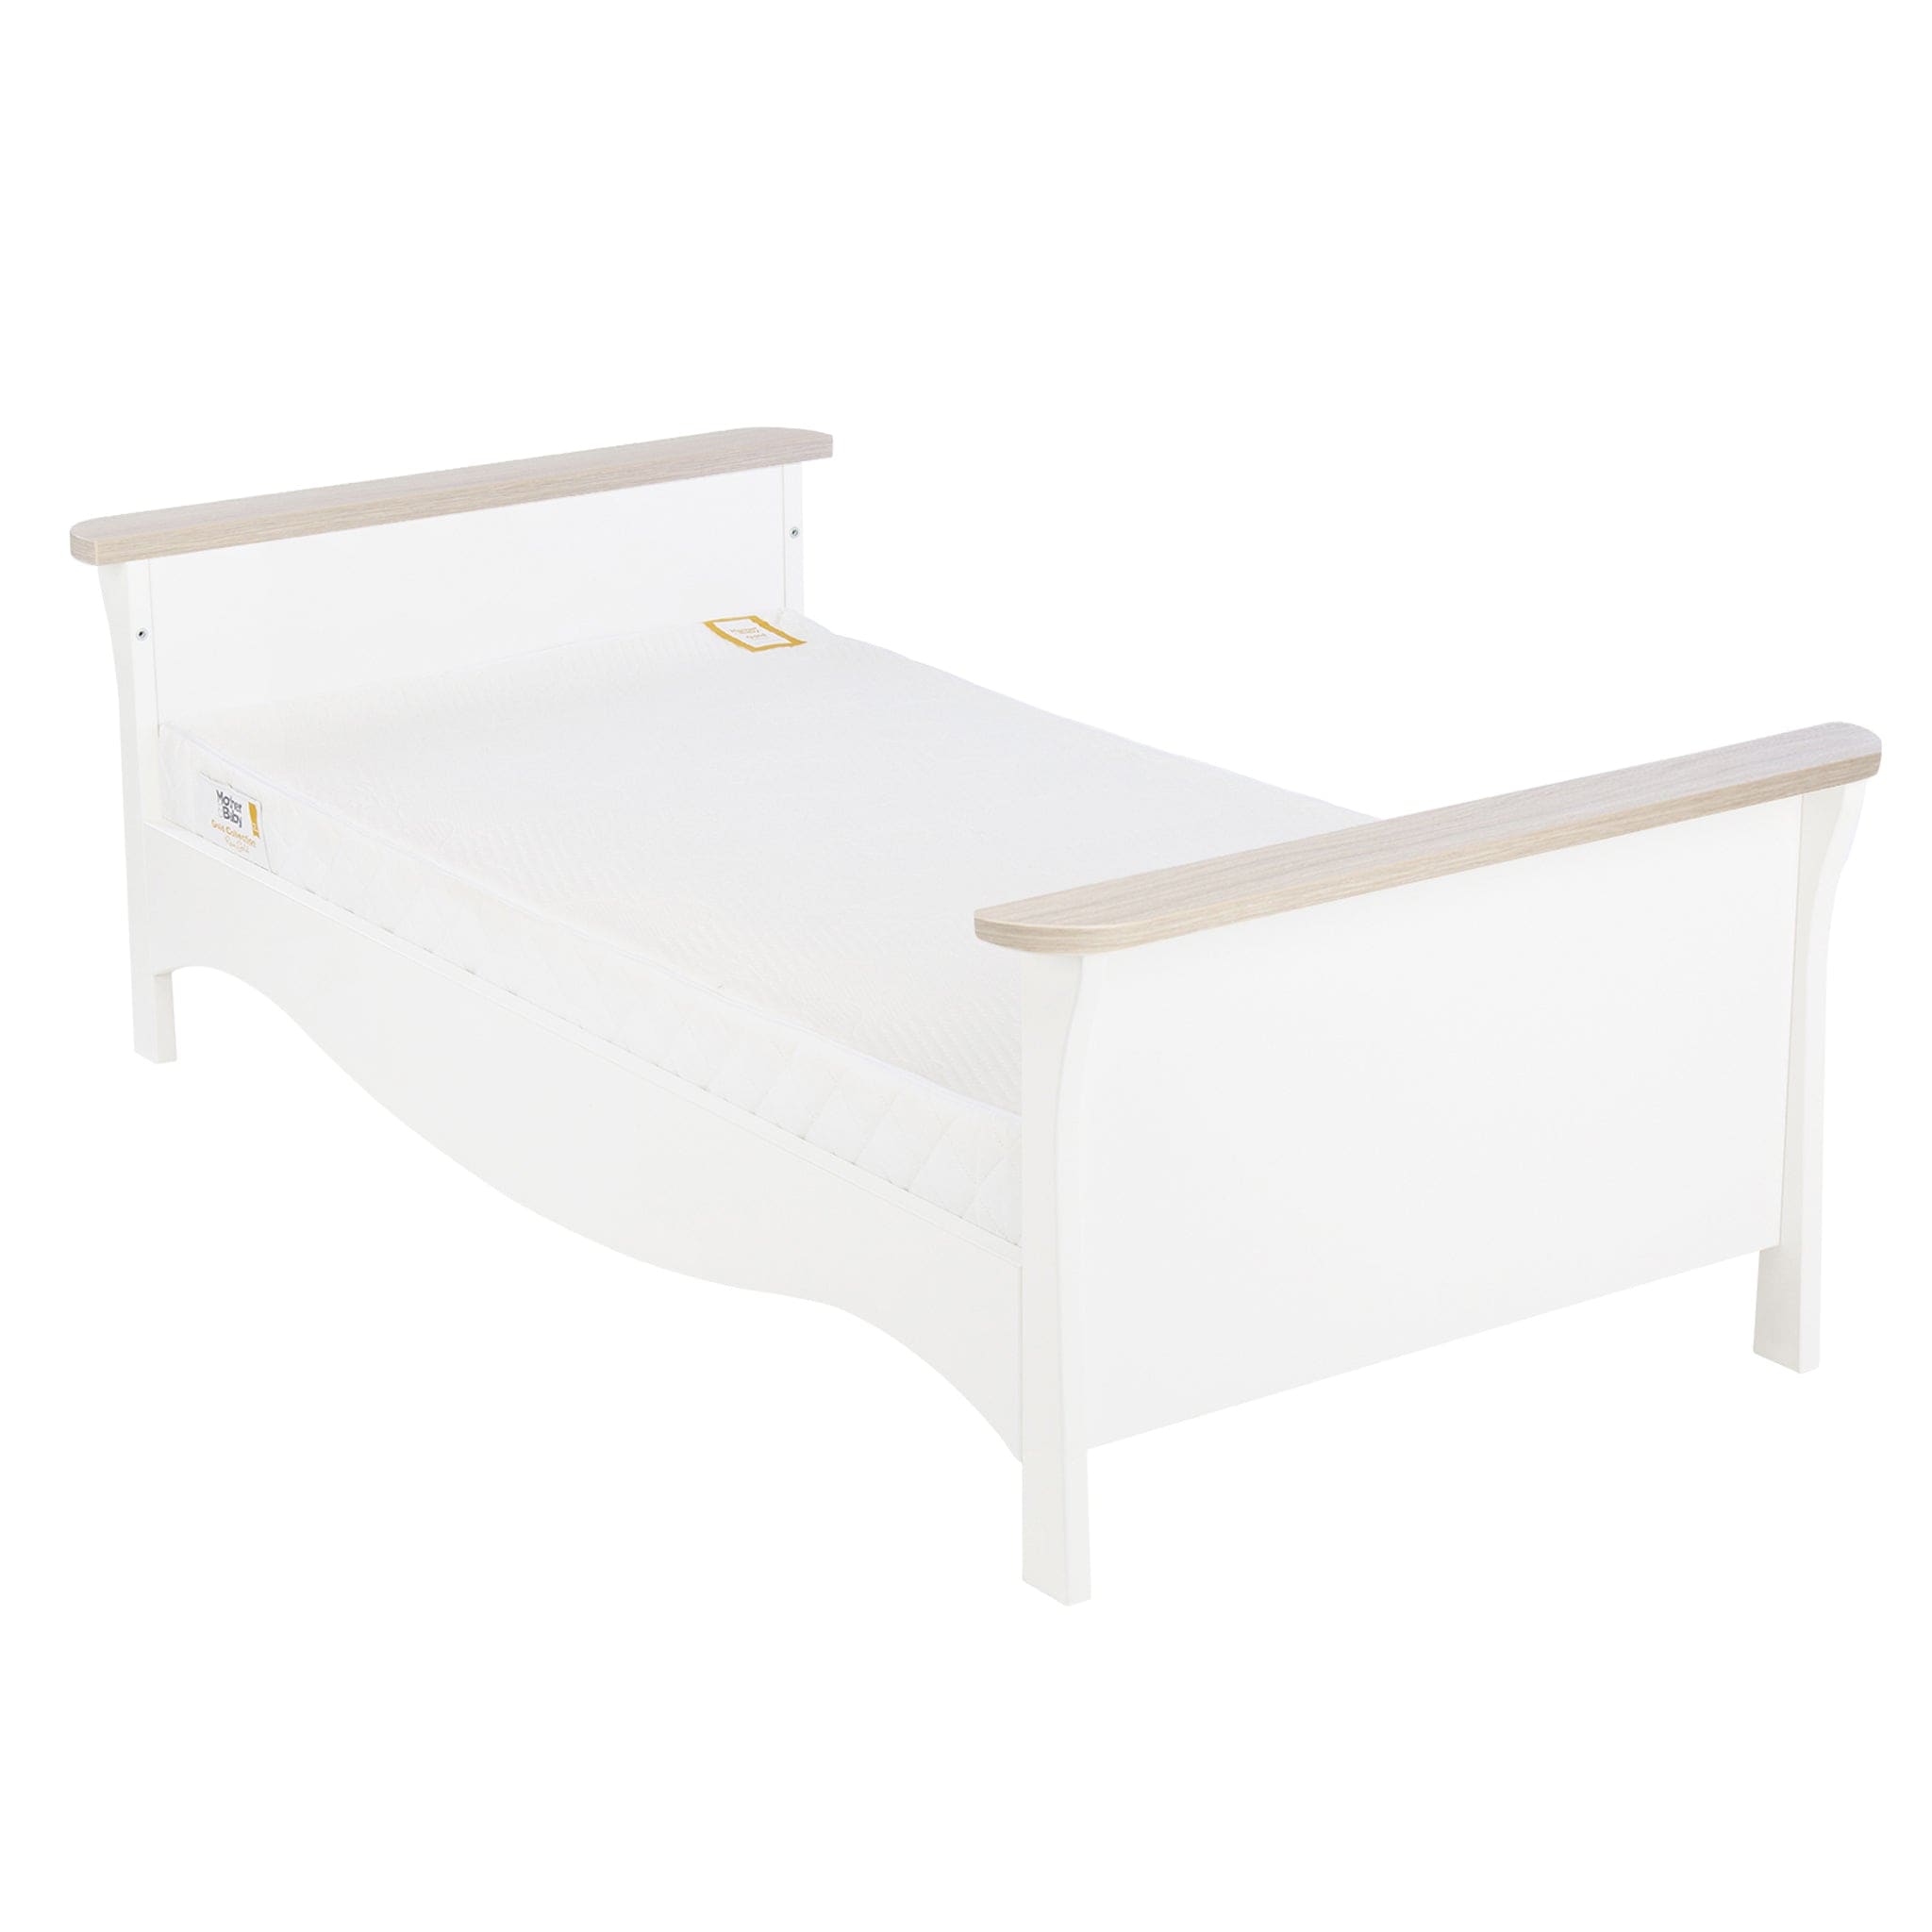 CuddleCo Clara Cot Bed in White & Ash Cot Beds